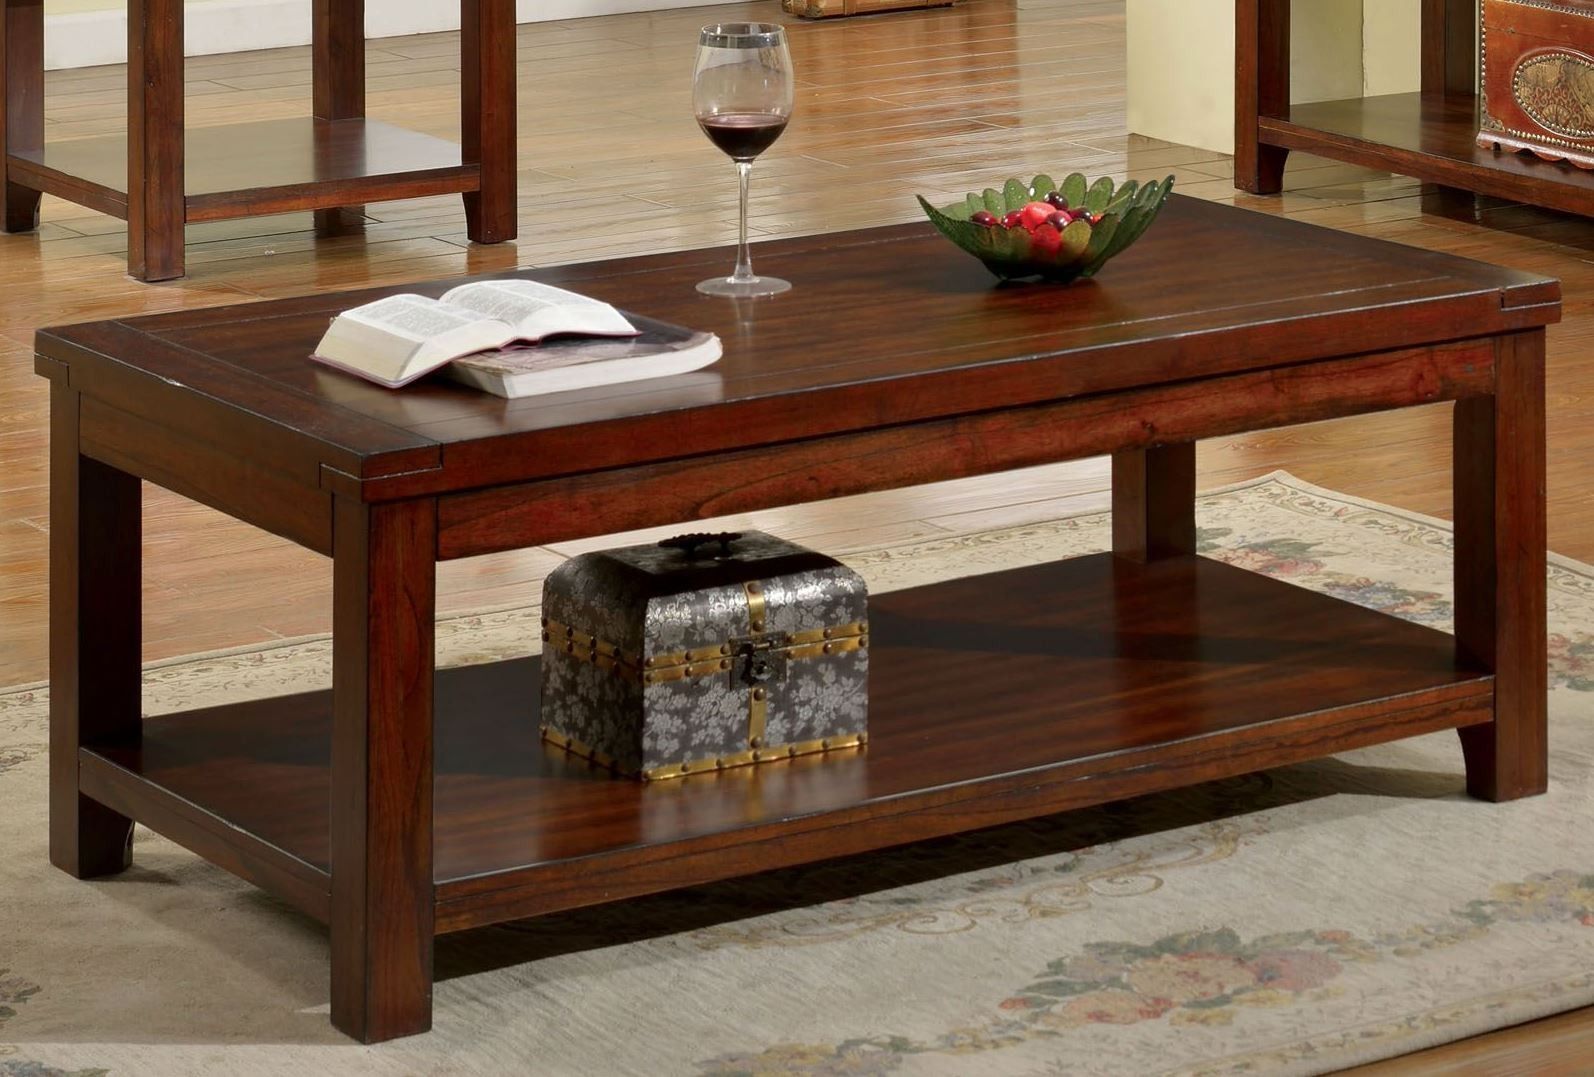 Estell Cherry Coffee Table From Furniture Of America Pertaining To Heartwood Cherry Wood Coffee Tables (View 2 of 15)